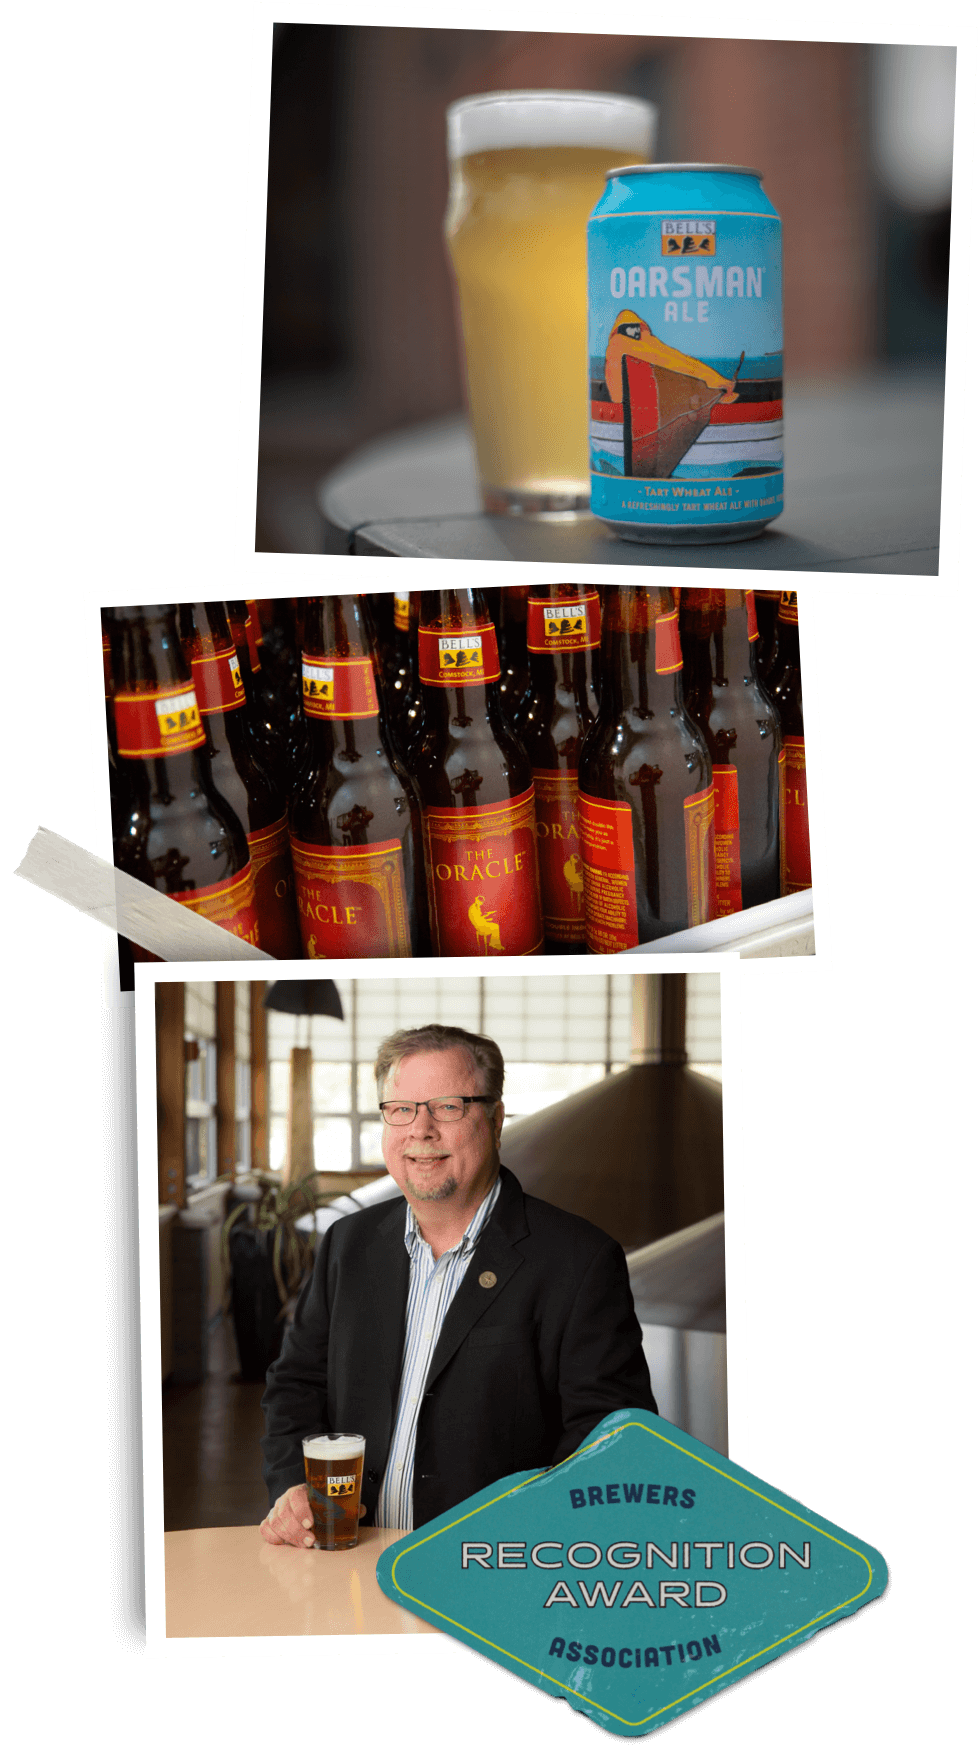 Collage of images showing cans of Oarsman Ale, label for The Oracle, and a headshot of Larry Bell